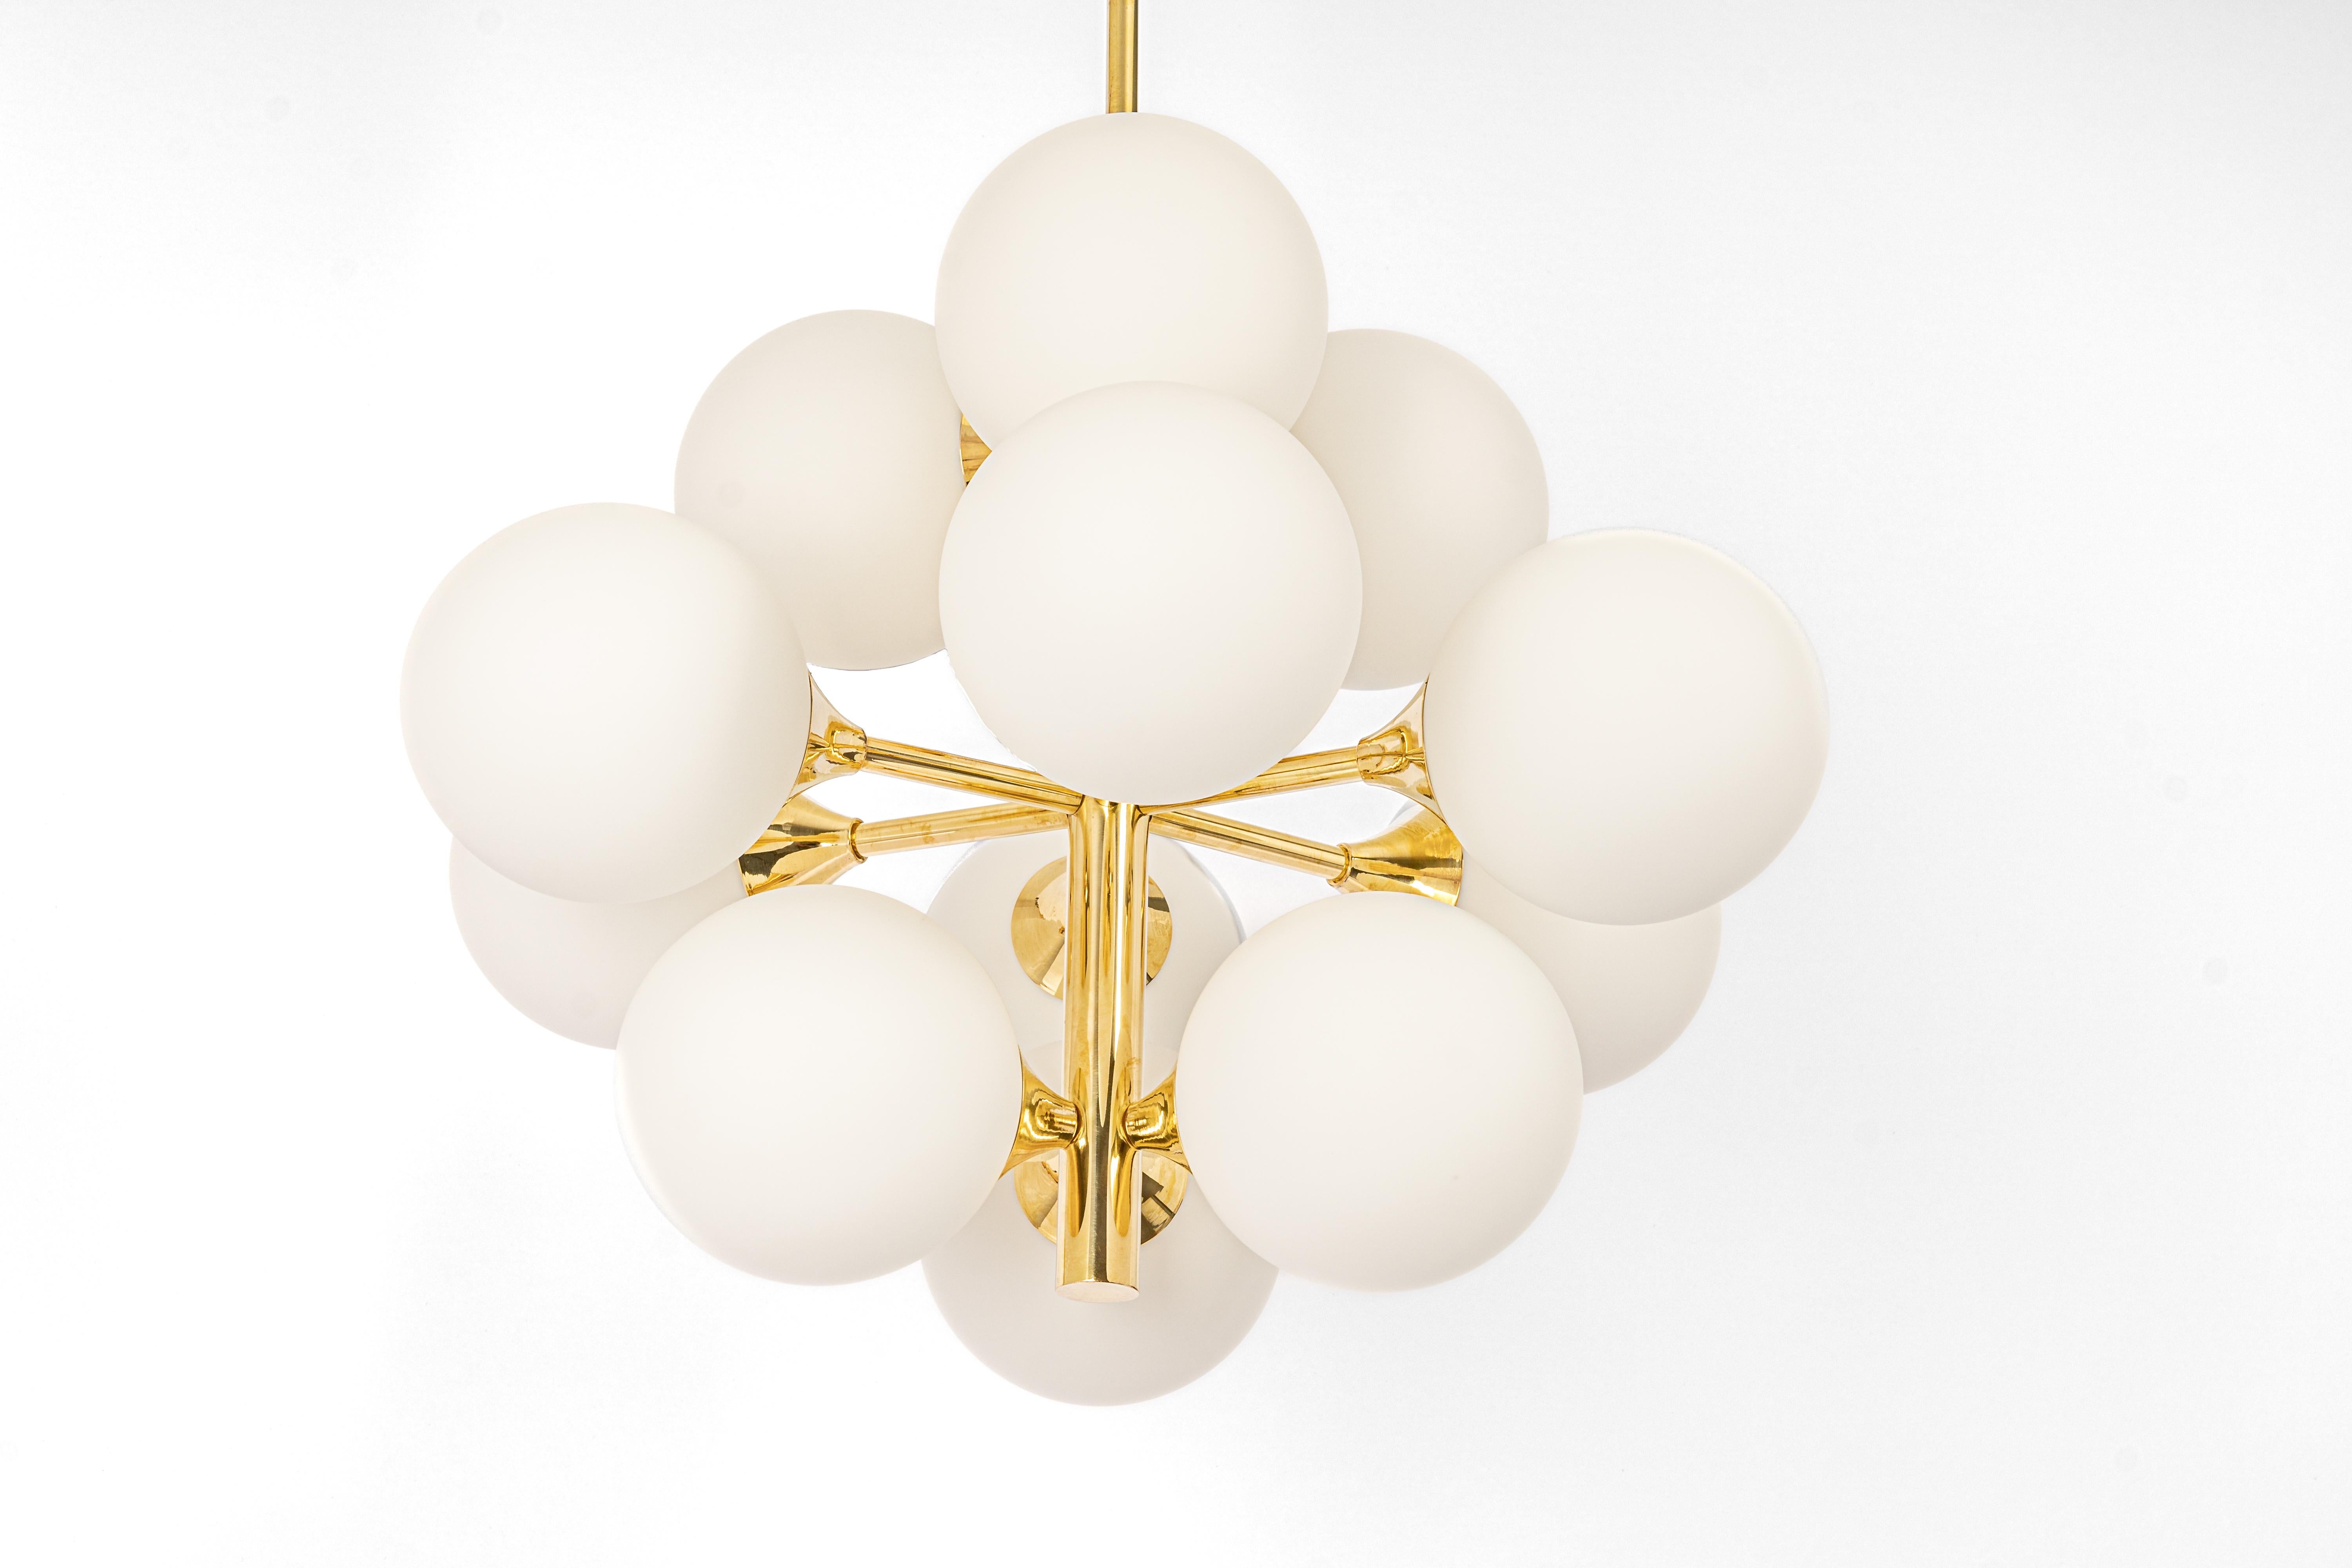 Stunning Sputnik brass chandelier with 12 opal glass globes by Kaiser Leuchten, Germany, 1960s.
High quality and in very good condition. Cleaned, well-wired, and ready to use. 

The fixture requires 12 x E14 standard bulbs with 40W max